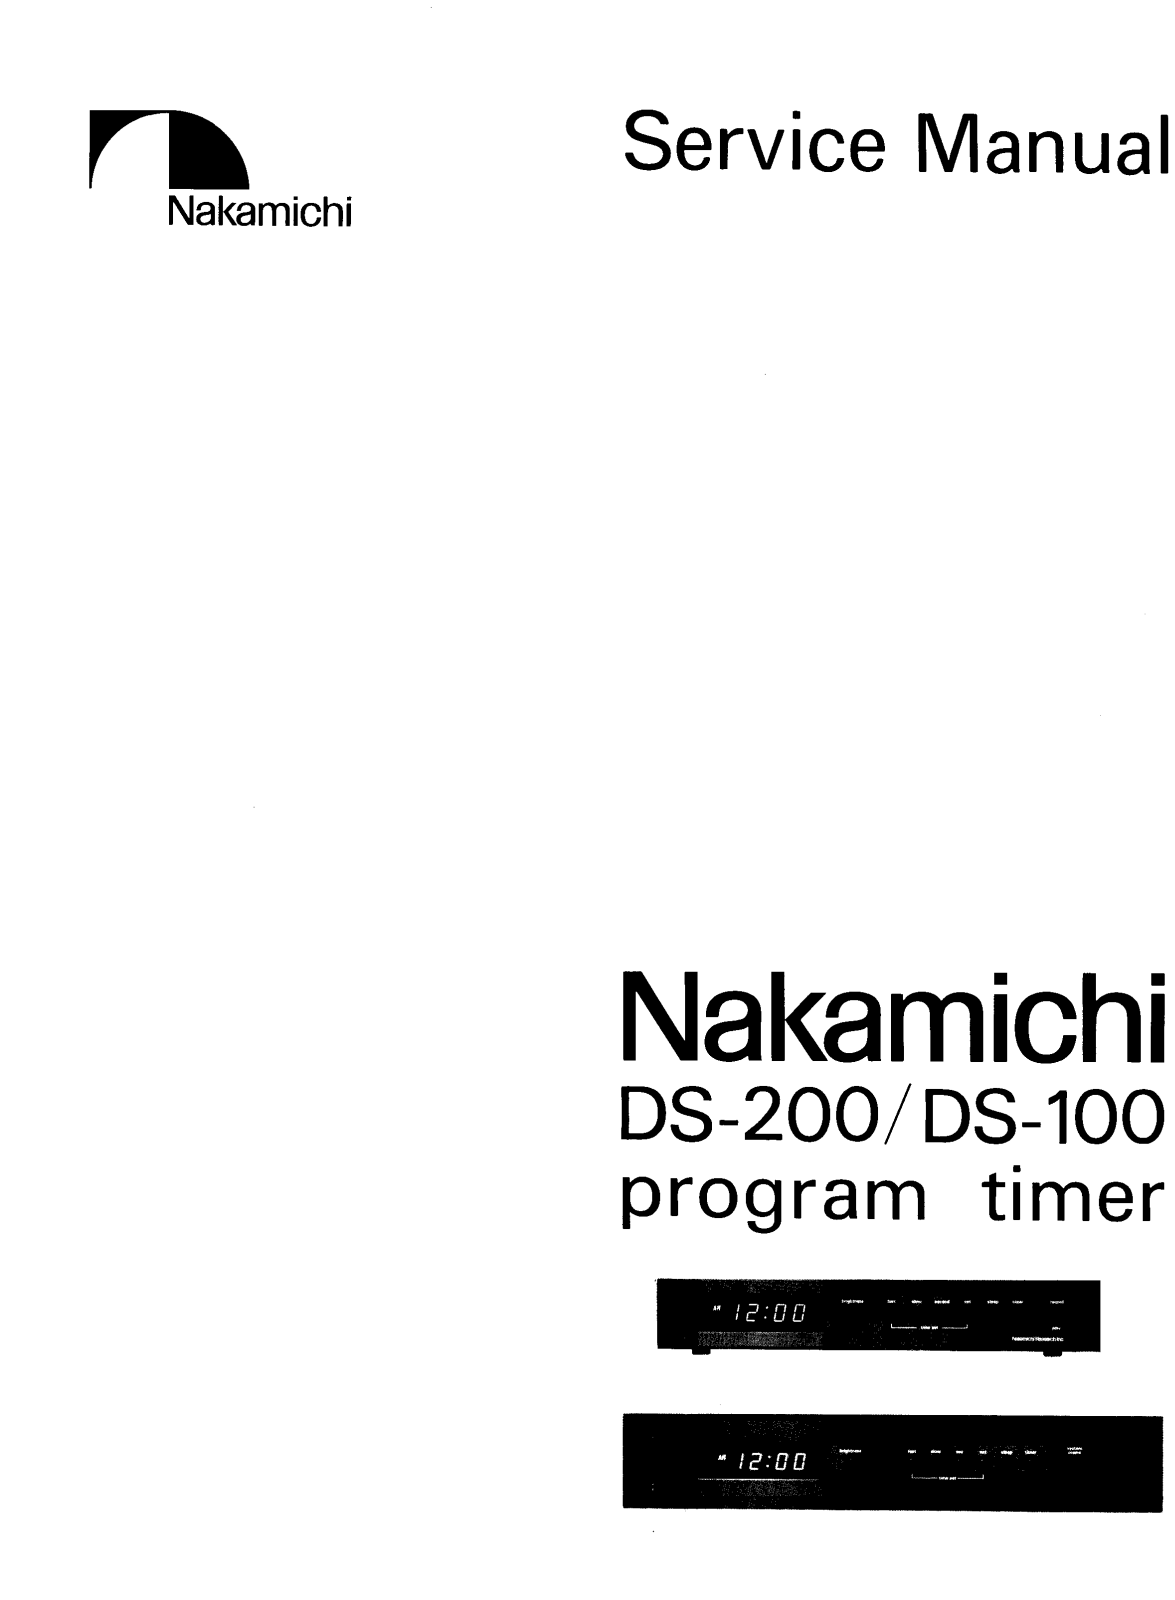 Nakamichi DS-100, DS-200 Service manual